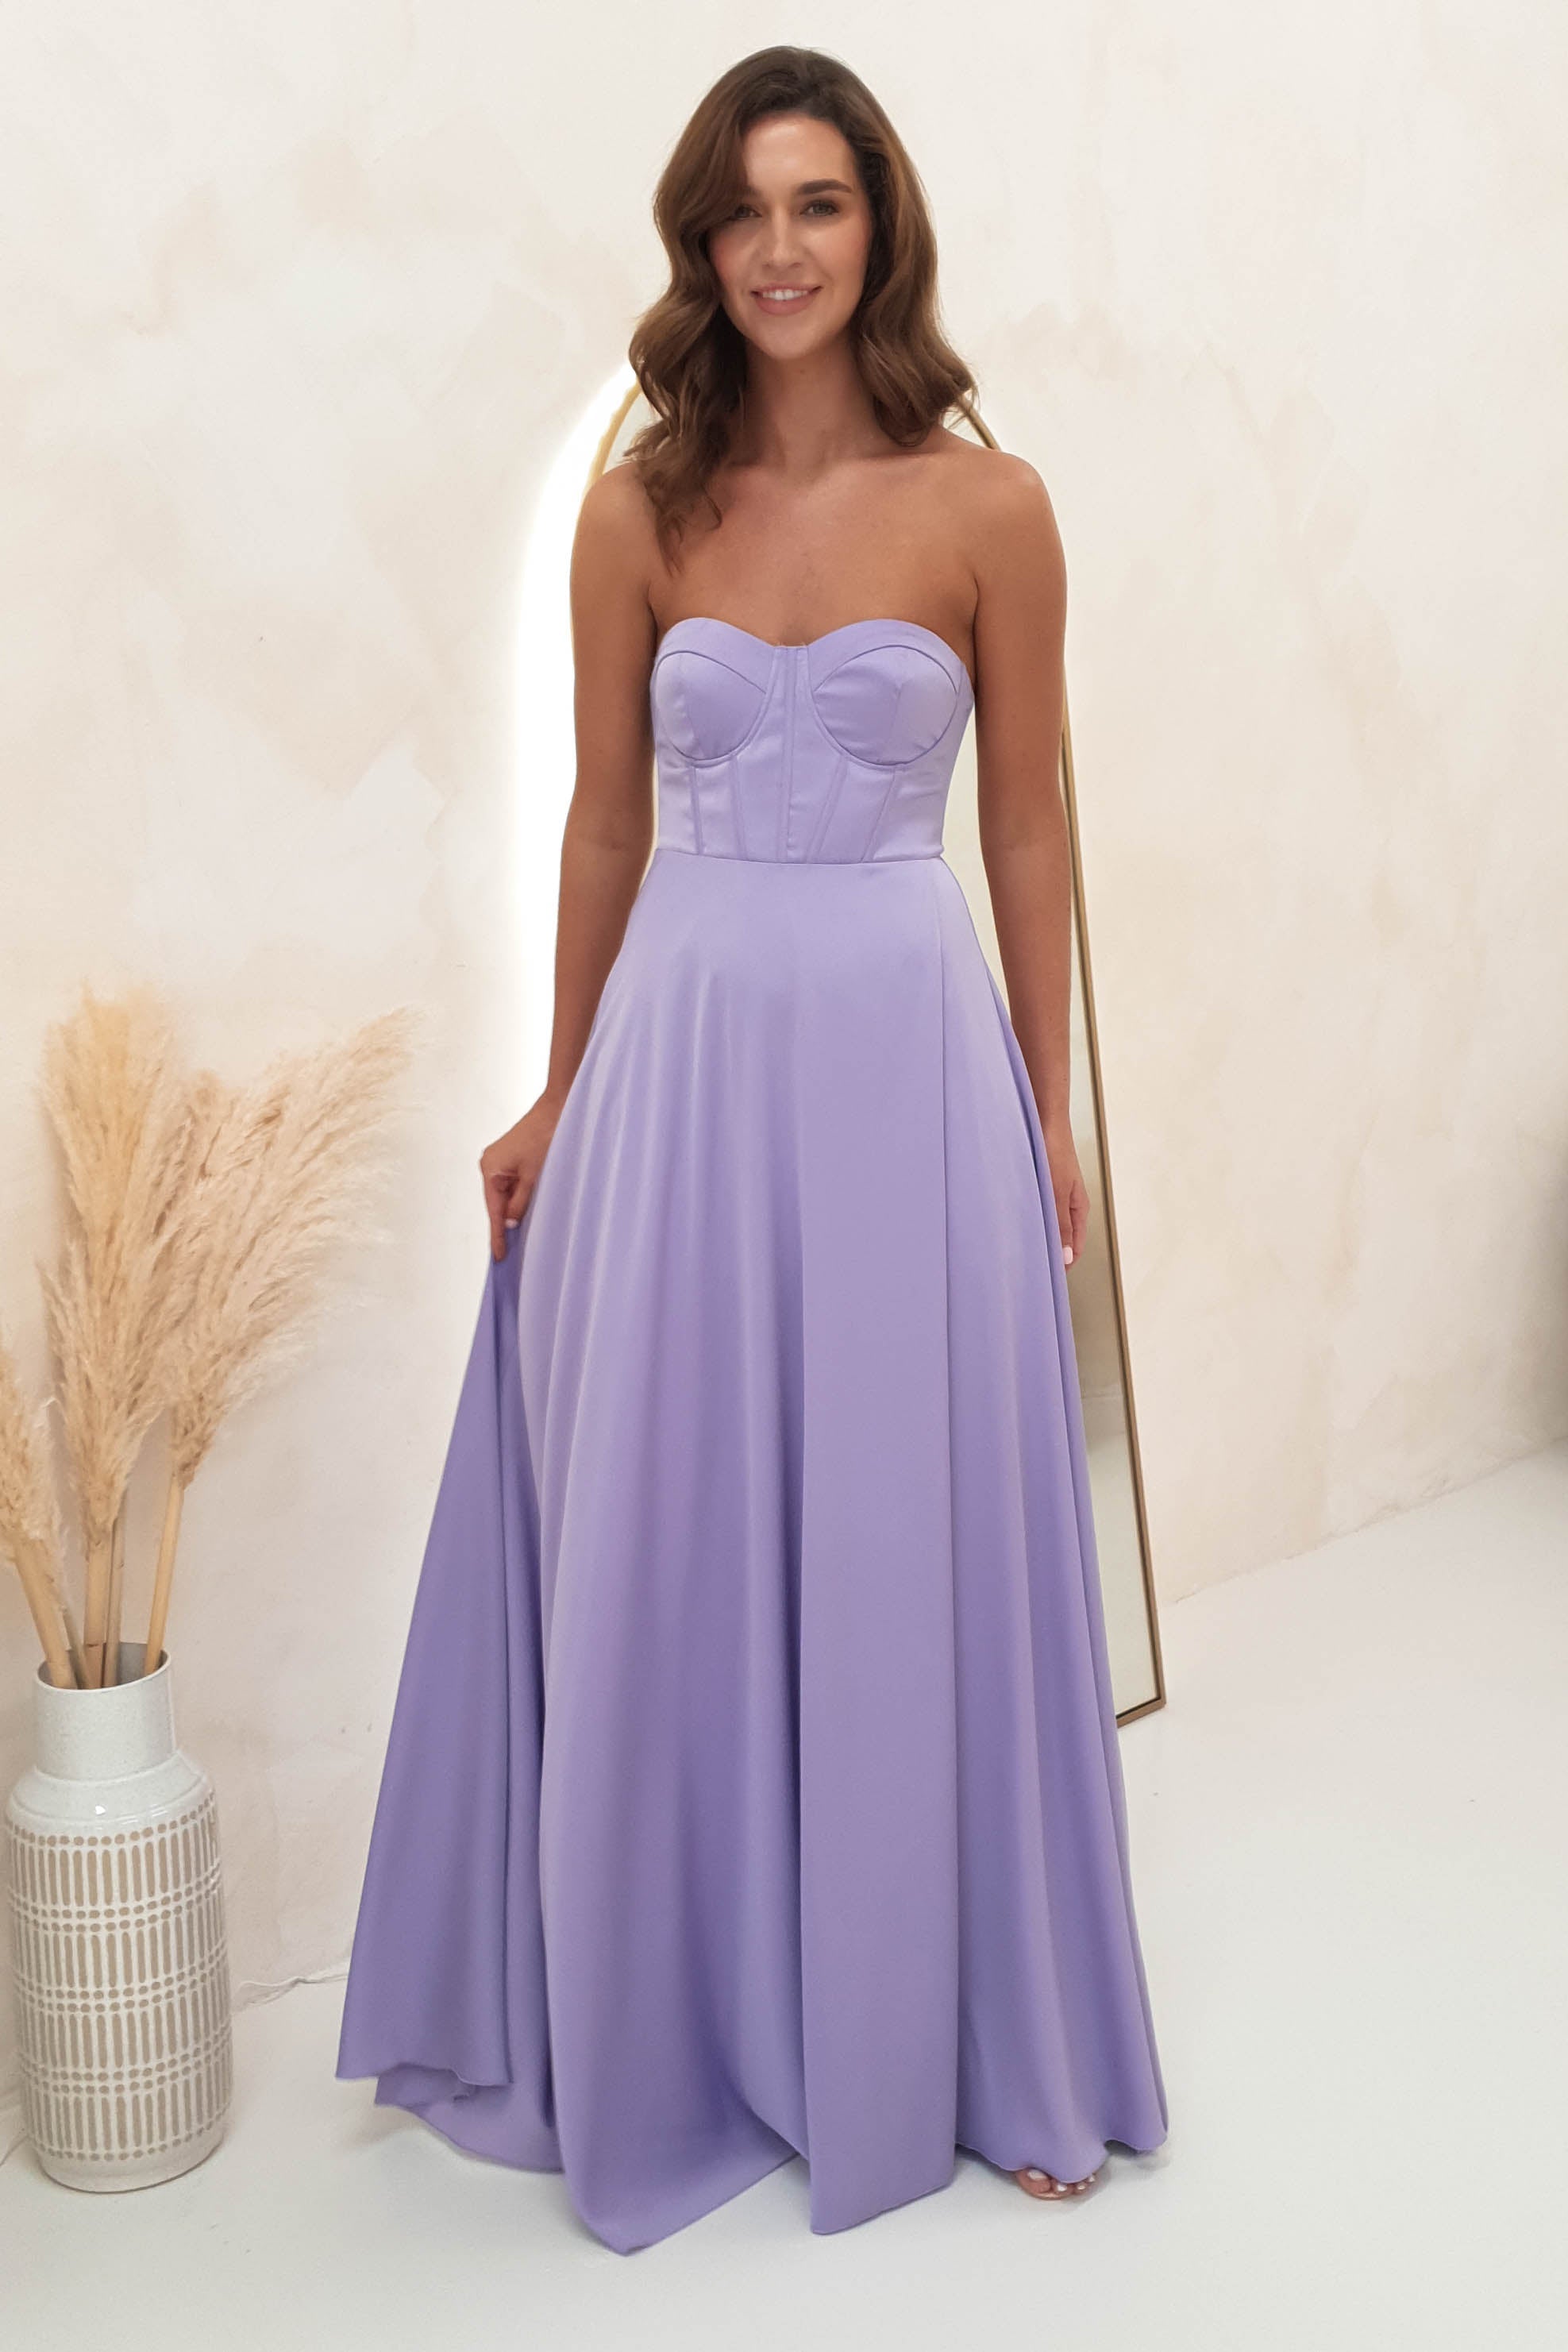 1-done-corset-aline-gown-lilac-dresses-50613266514261.jpg